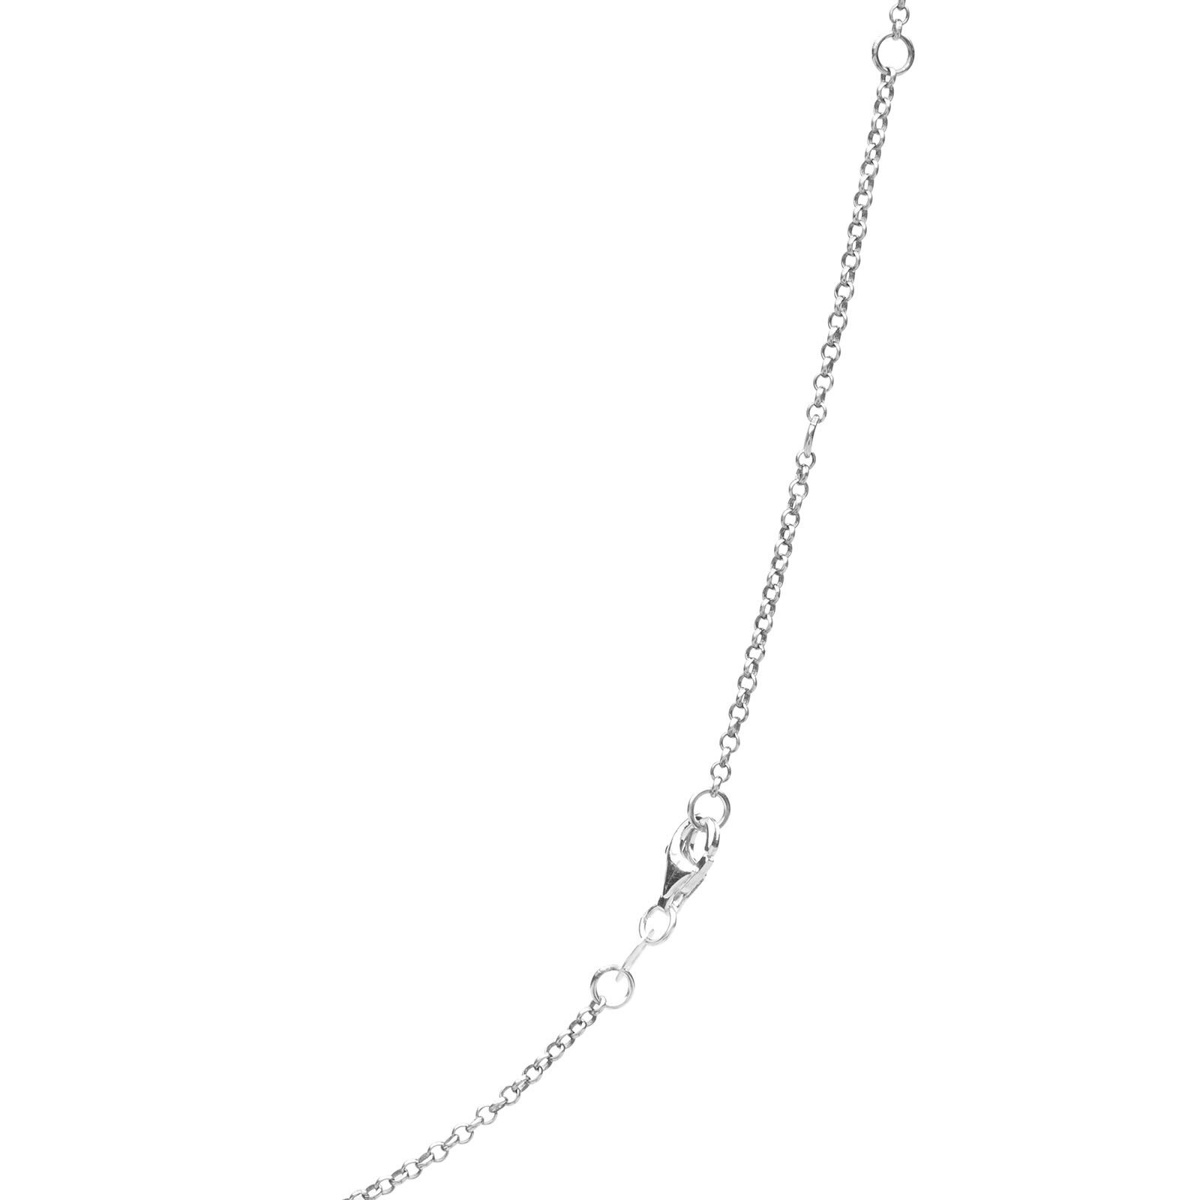 Serge Denimes Cross Sterling Silver Necklace | Coggles